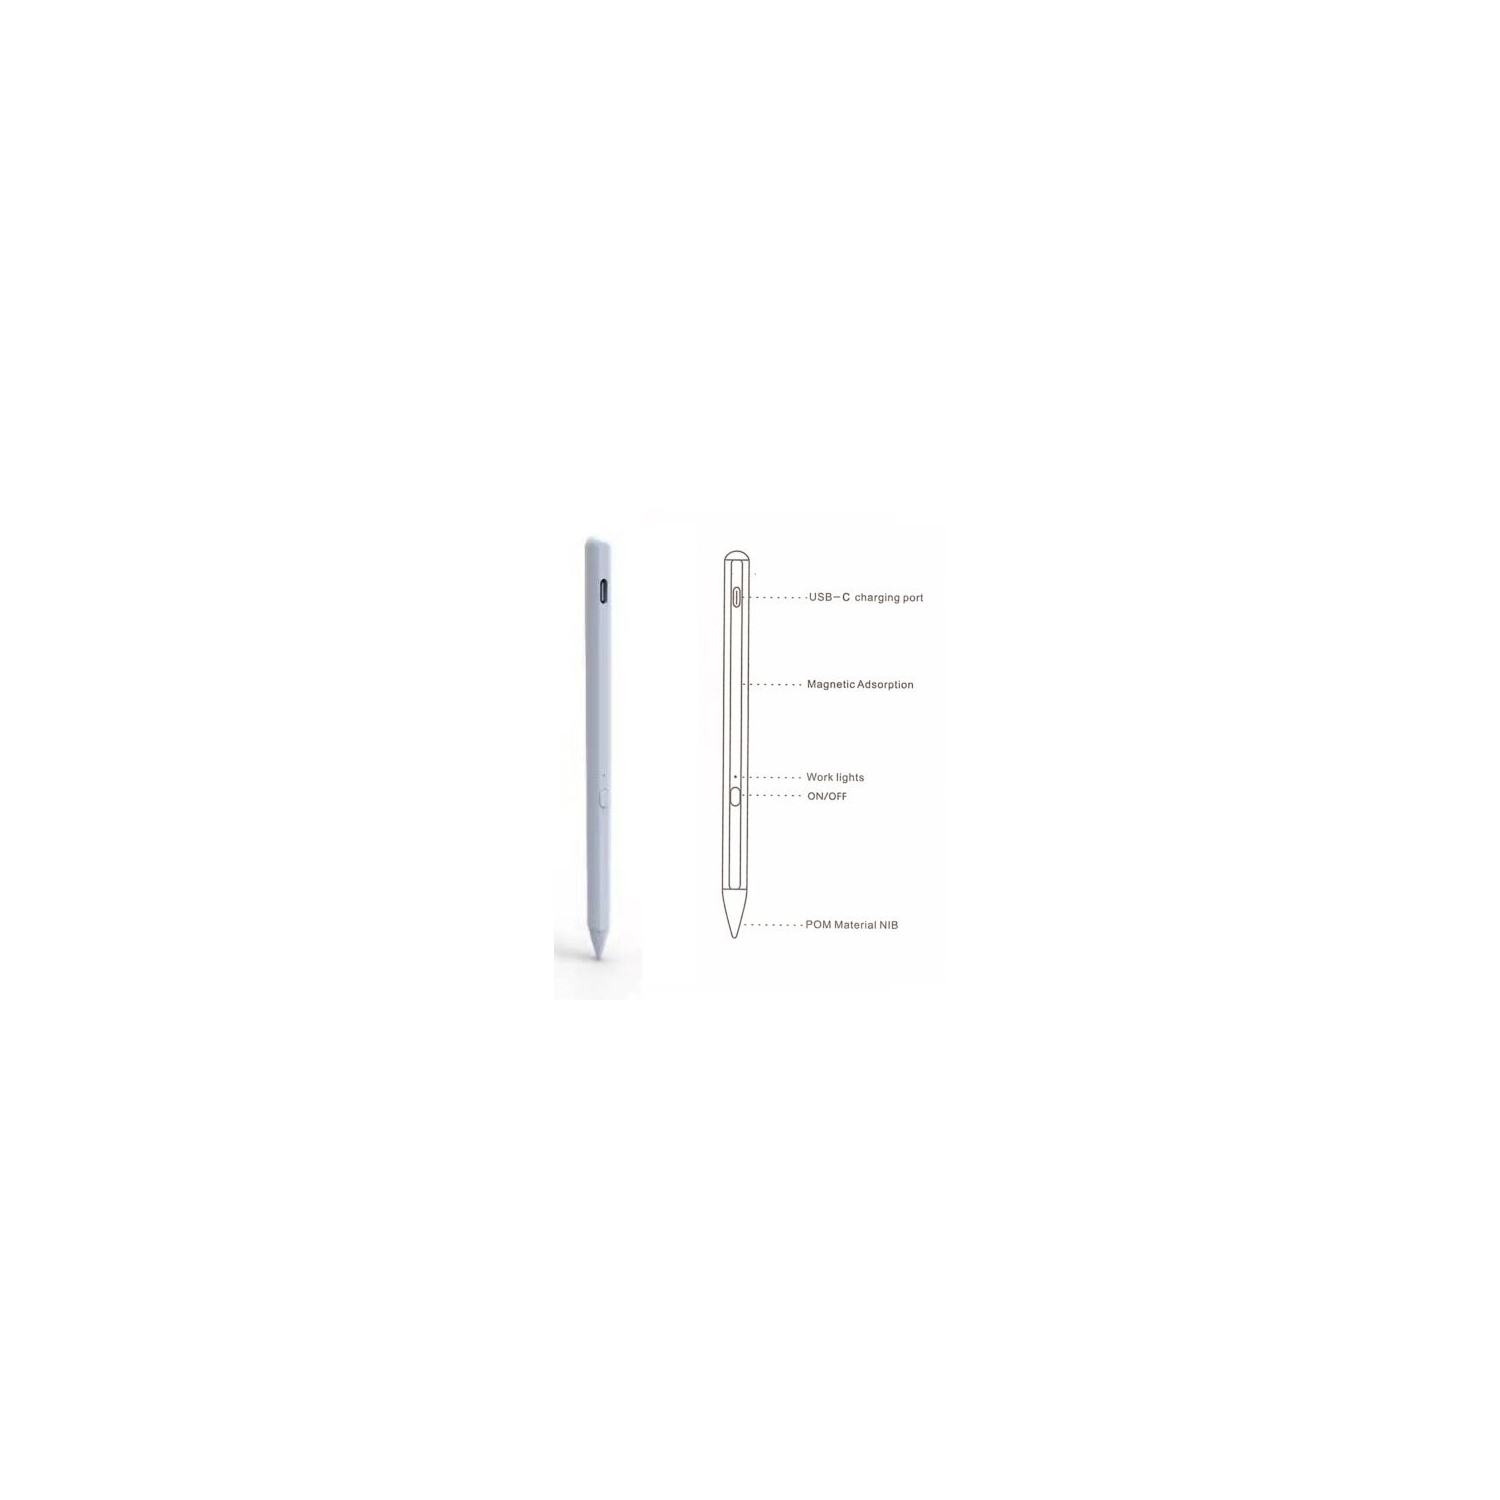 HYFAI Stylus Pen, Digital Pen for Apple iPad 2018-2020,for iPad 6/7/8th,Air 3rd/4th, Mini 5th,iPad Pro 3rd/4th (11"&12.9"),with Palm-Rejection. Compatible with Apple Pencil 2 (White)